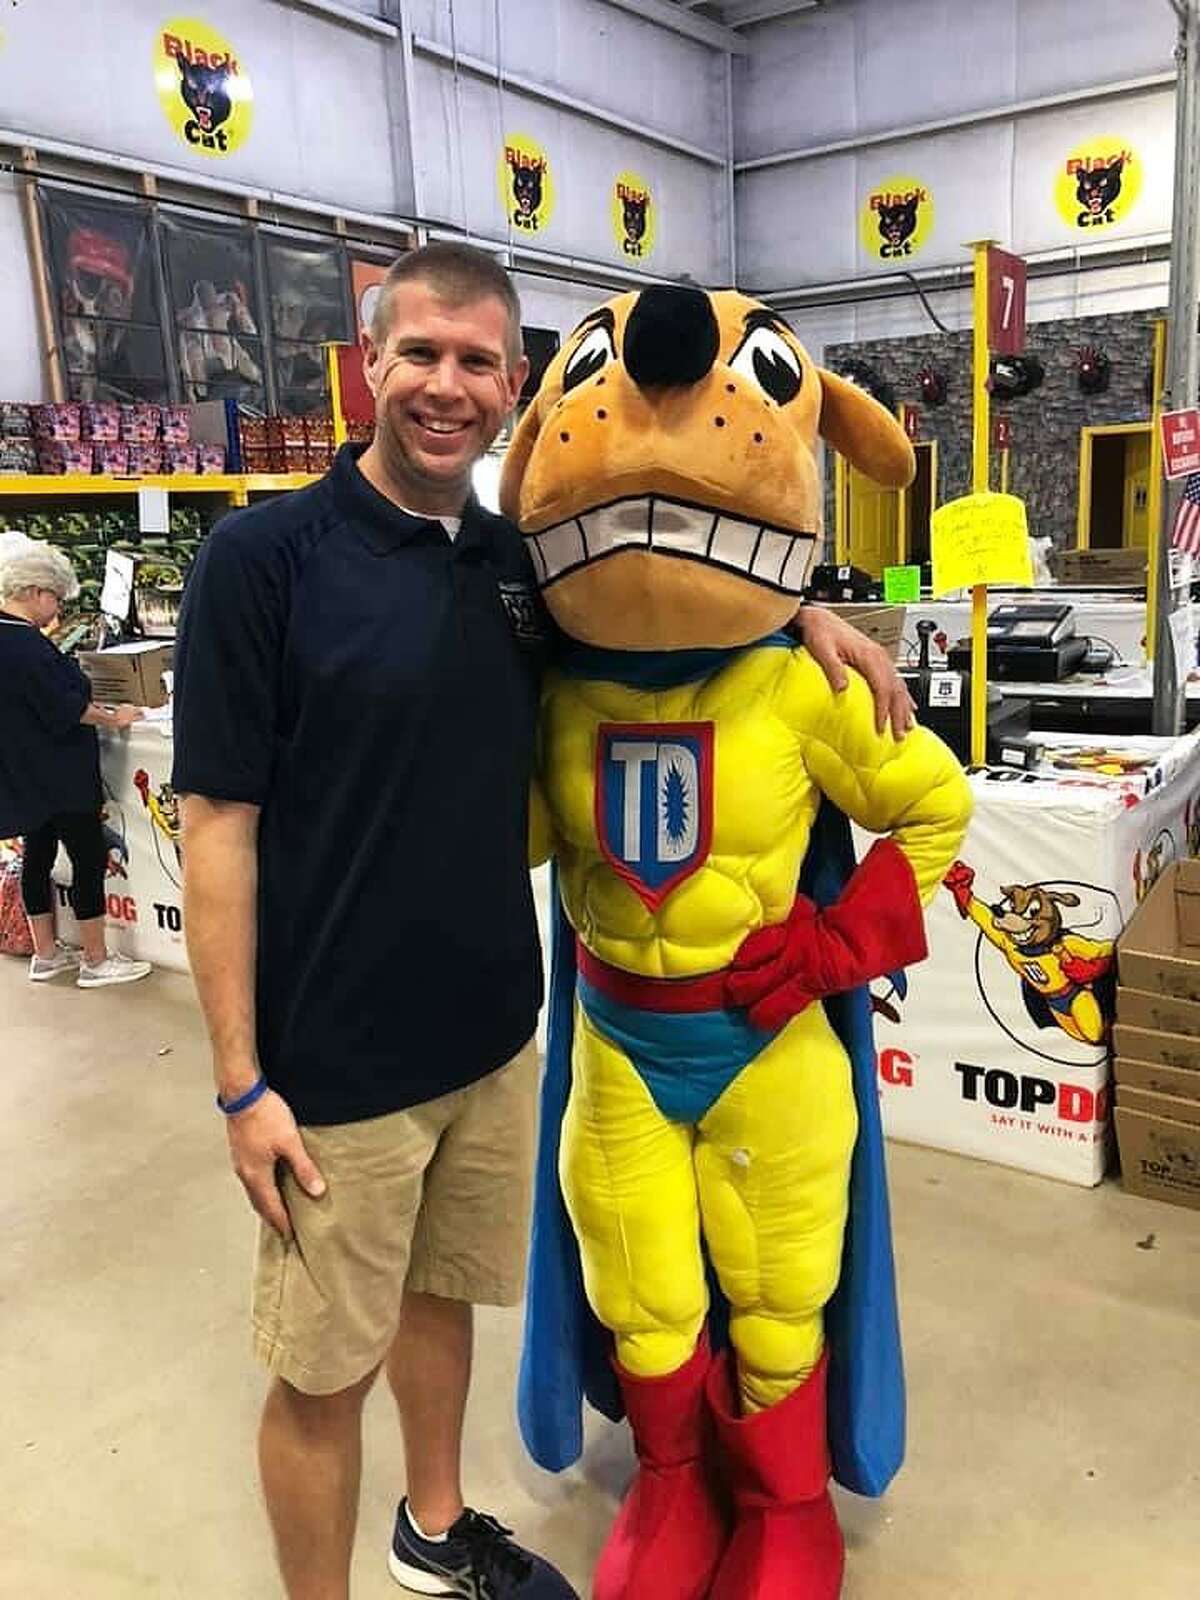 Tomball Memorial High School band director Andy Easton and Top Dog invite the public to the fireworks store at 20432 Northwest Fwy. between Huffmeister and FM 1960. Purchasing fireworks at that location helps promote the arts and band program at the school.